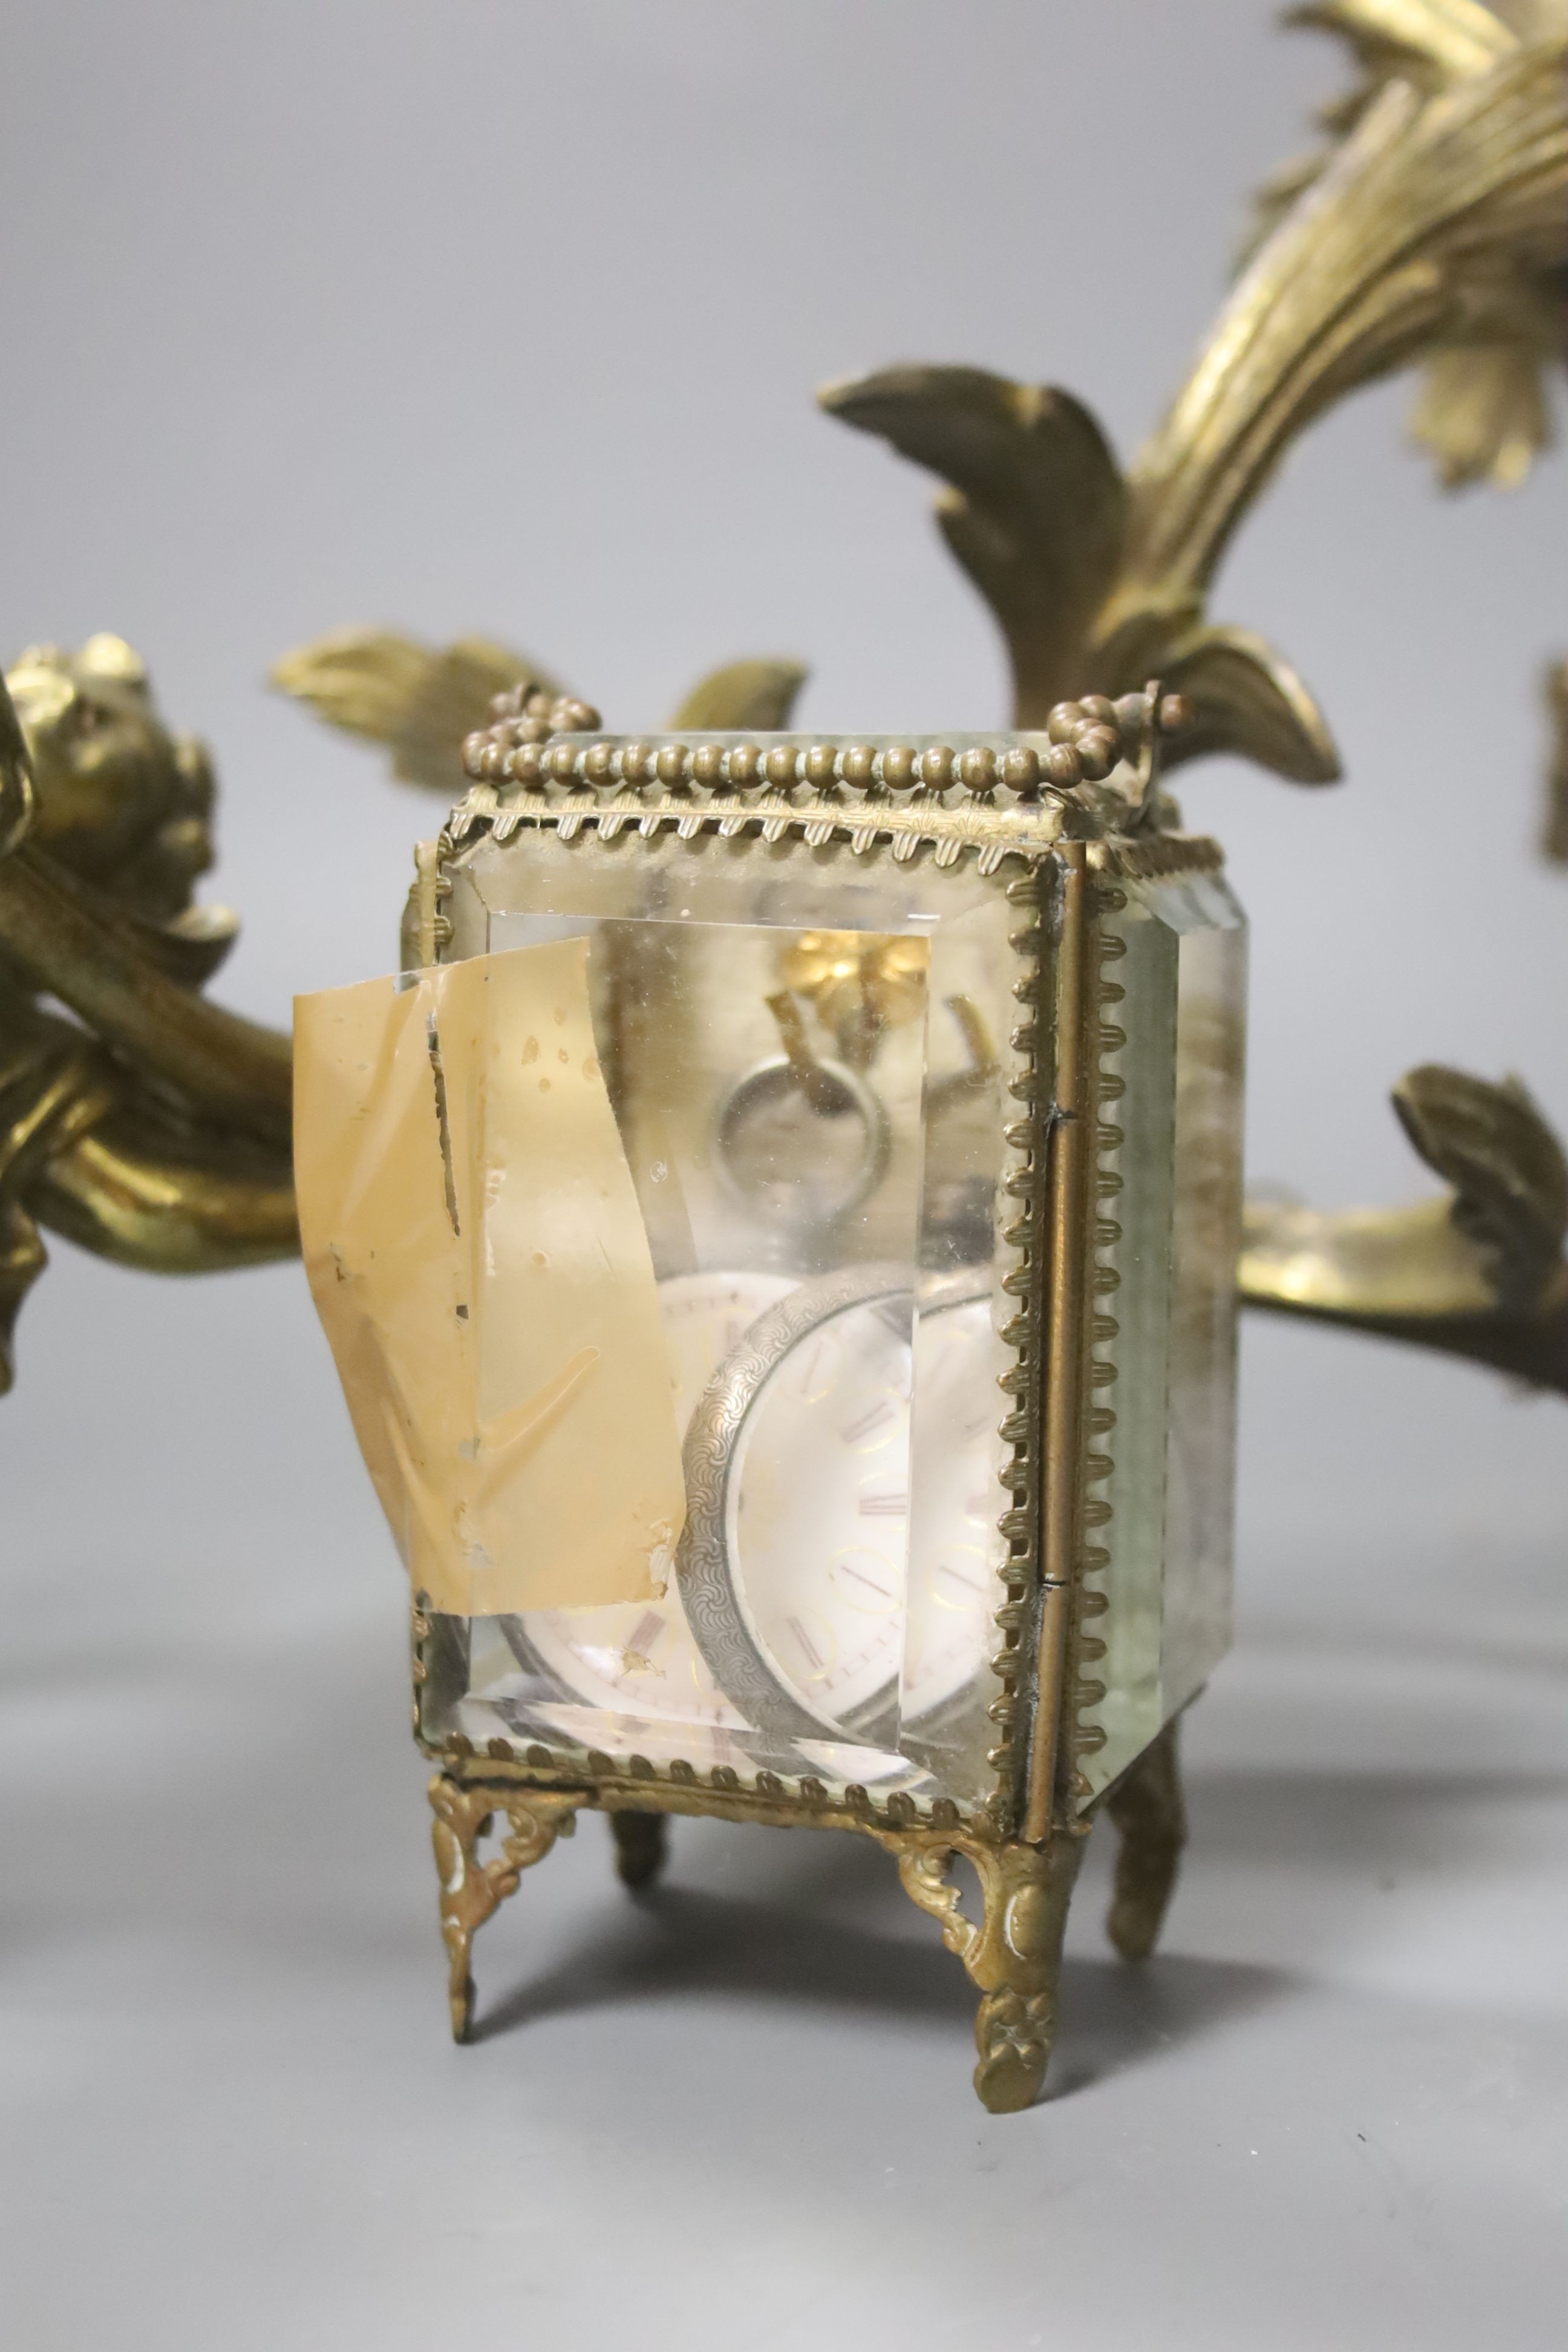 A brass carriage timepiece, a brass casket containing silver watch and a brass rococo-style twin-sconce wall light